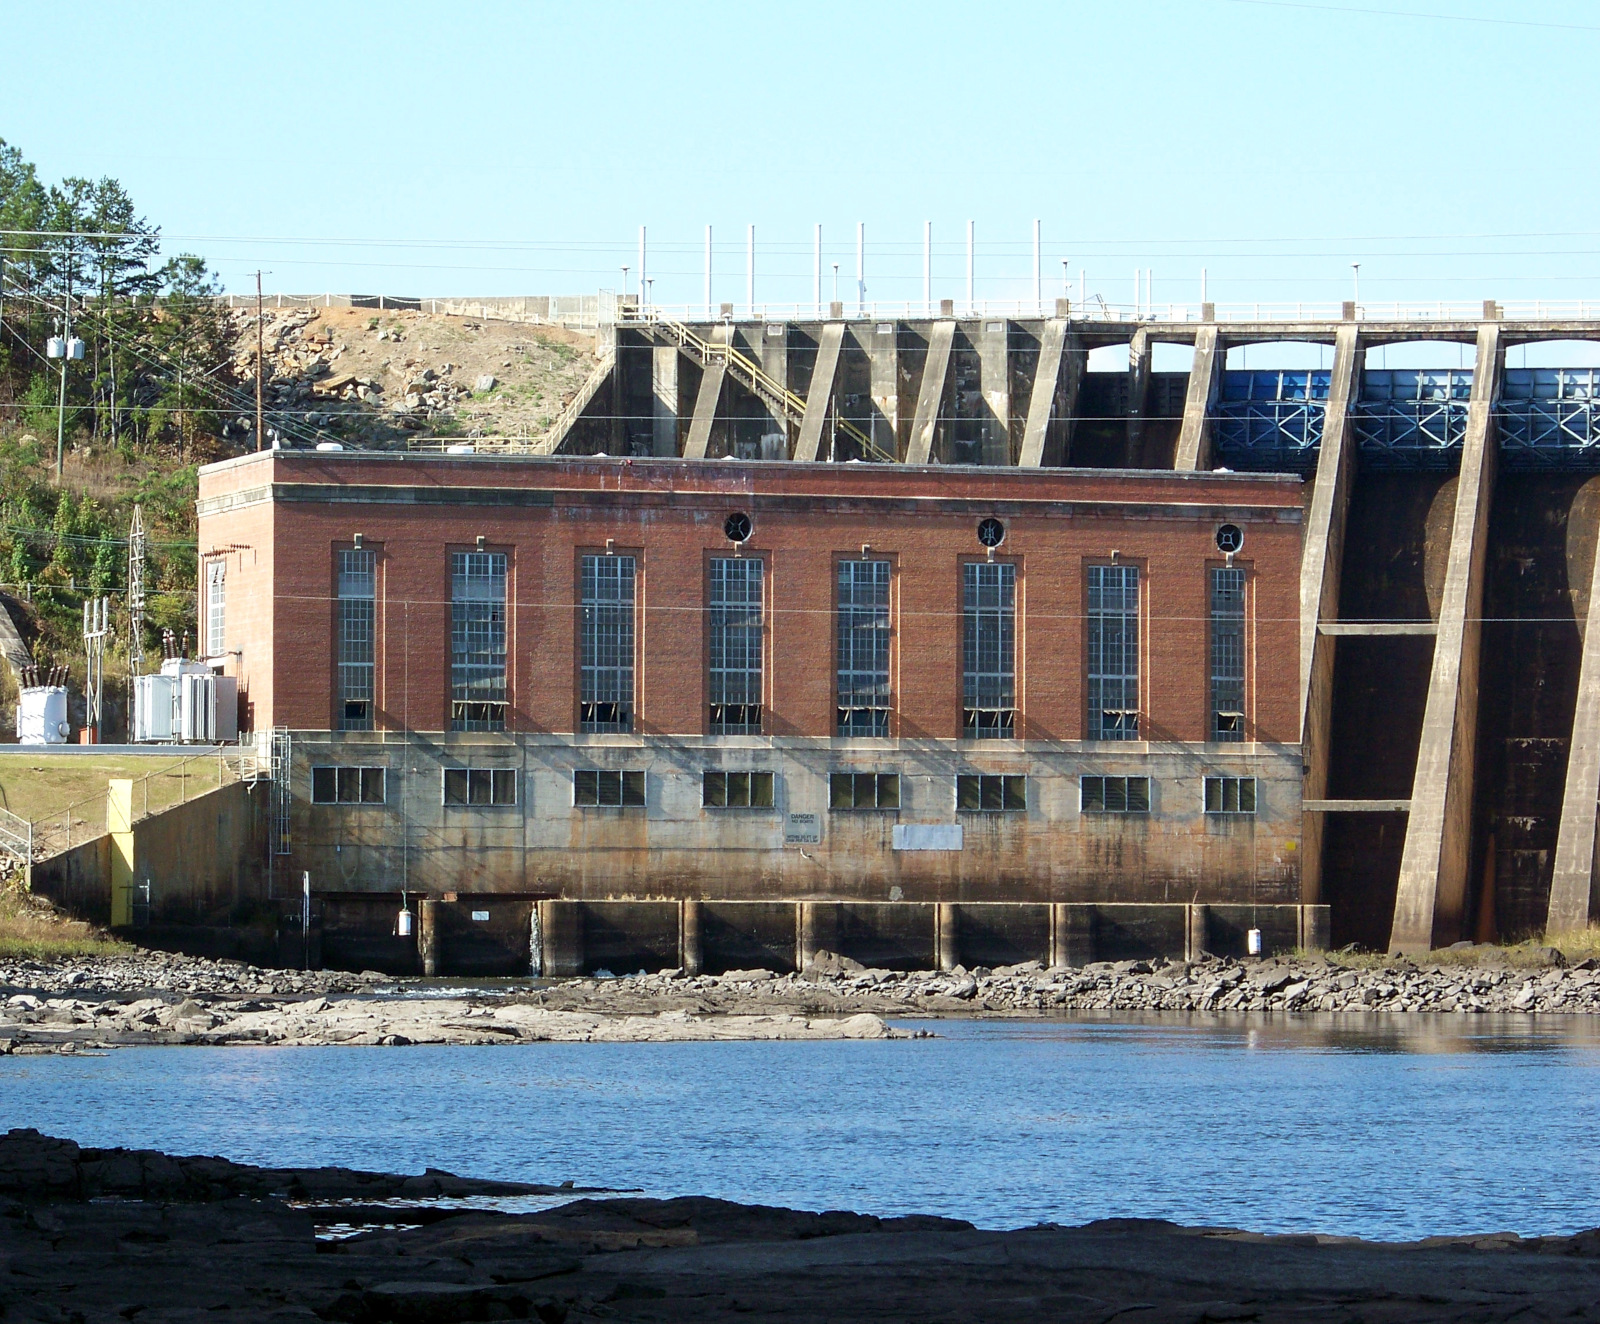 The original powerhouse of Bartletts Ferry Dam, built 1924-1925 and expanded after World War II.